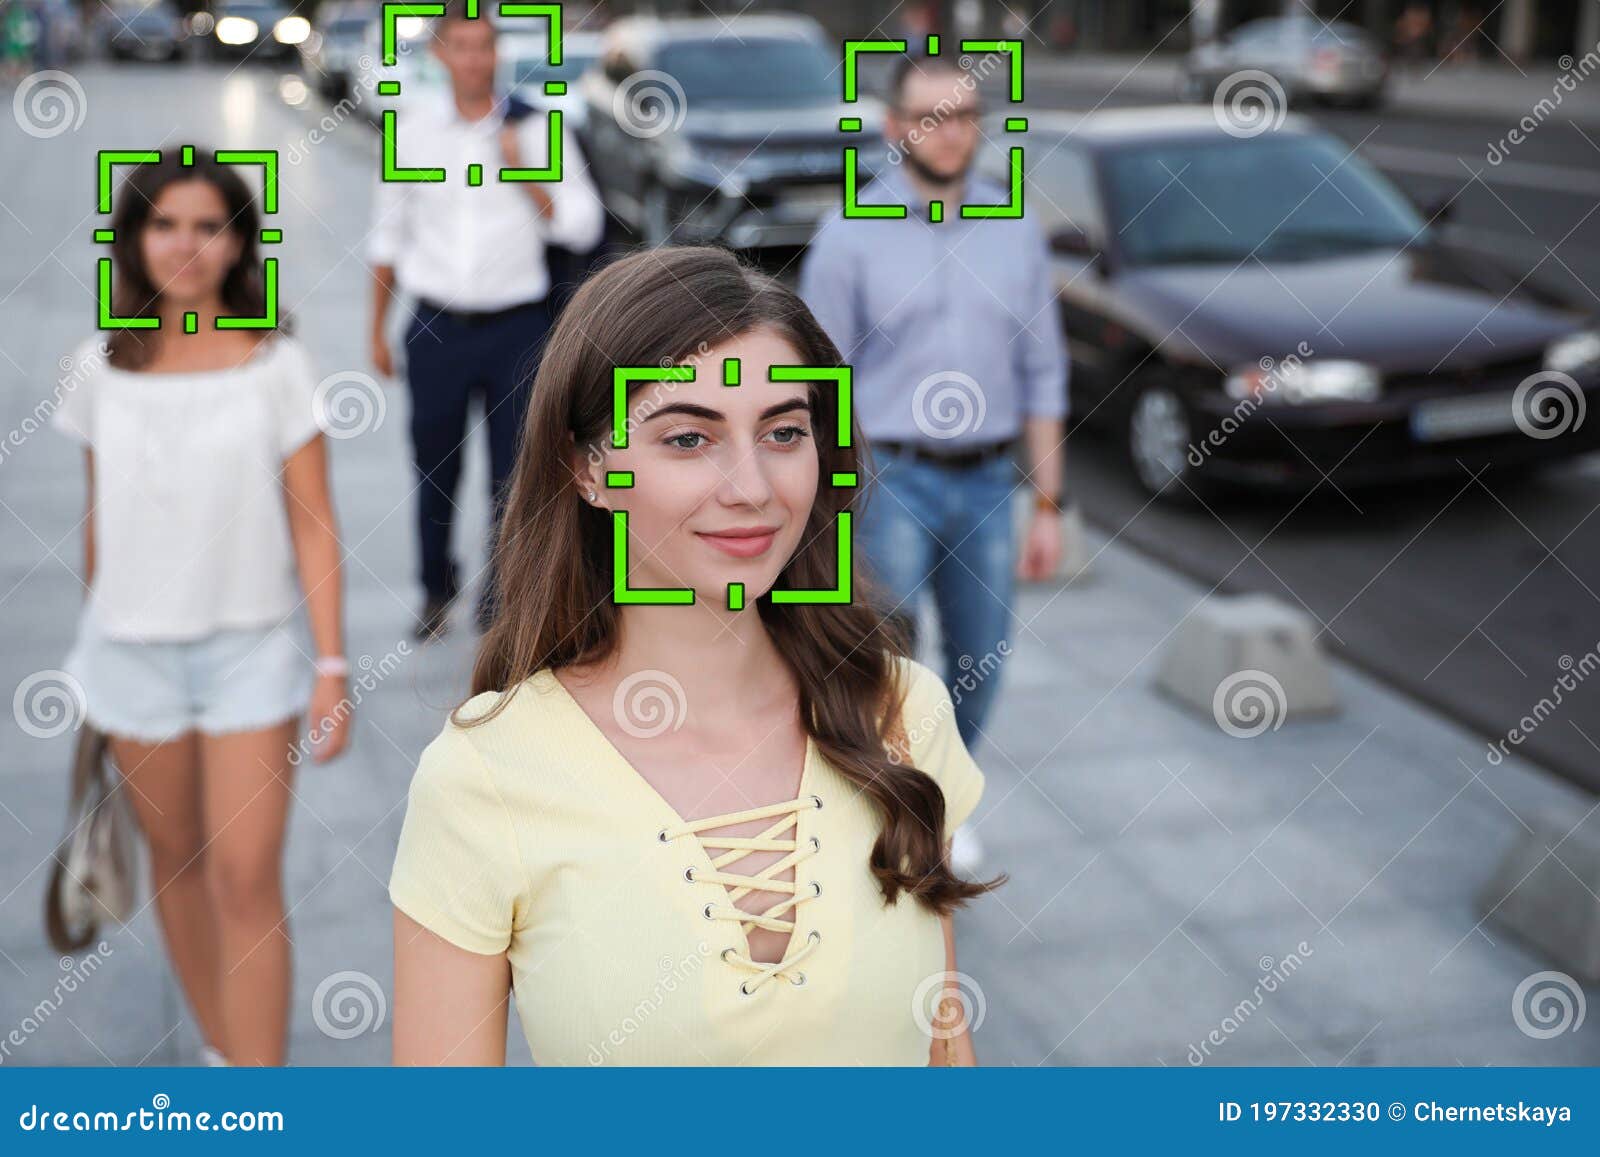 facial recognition system identifying people on city street